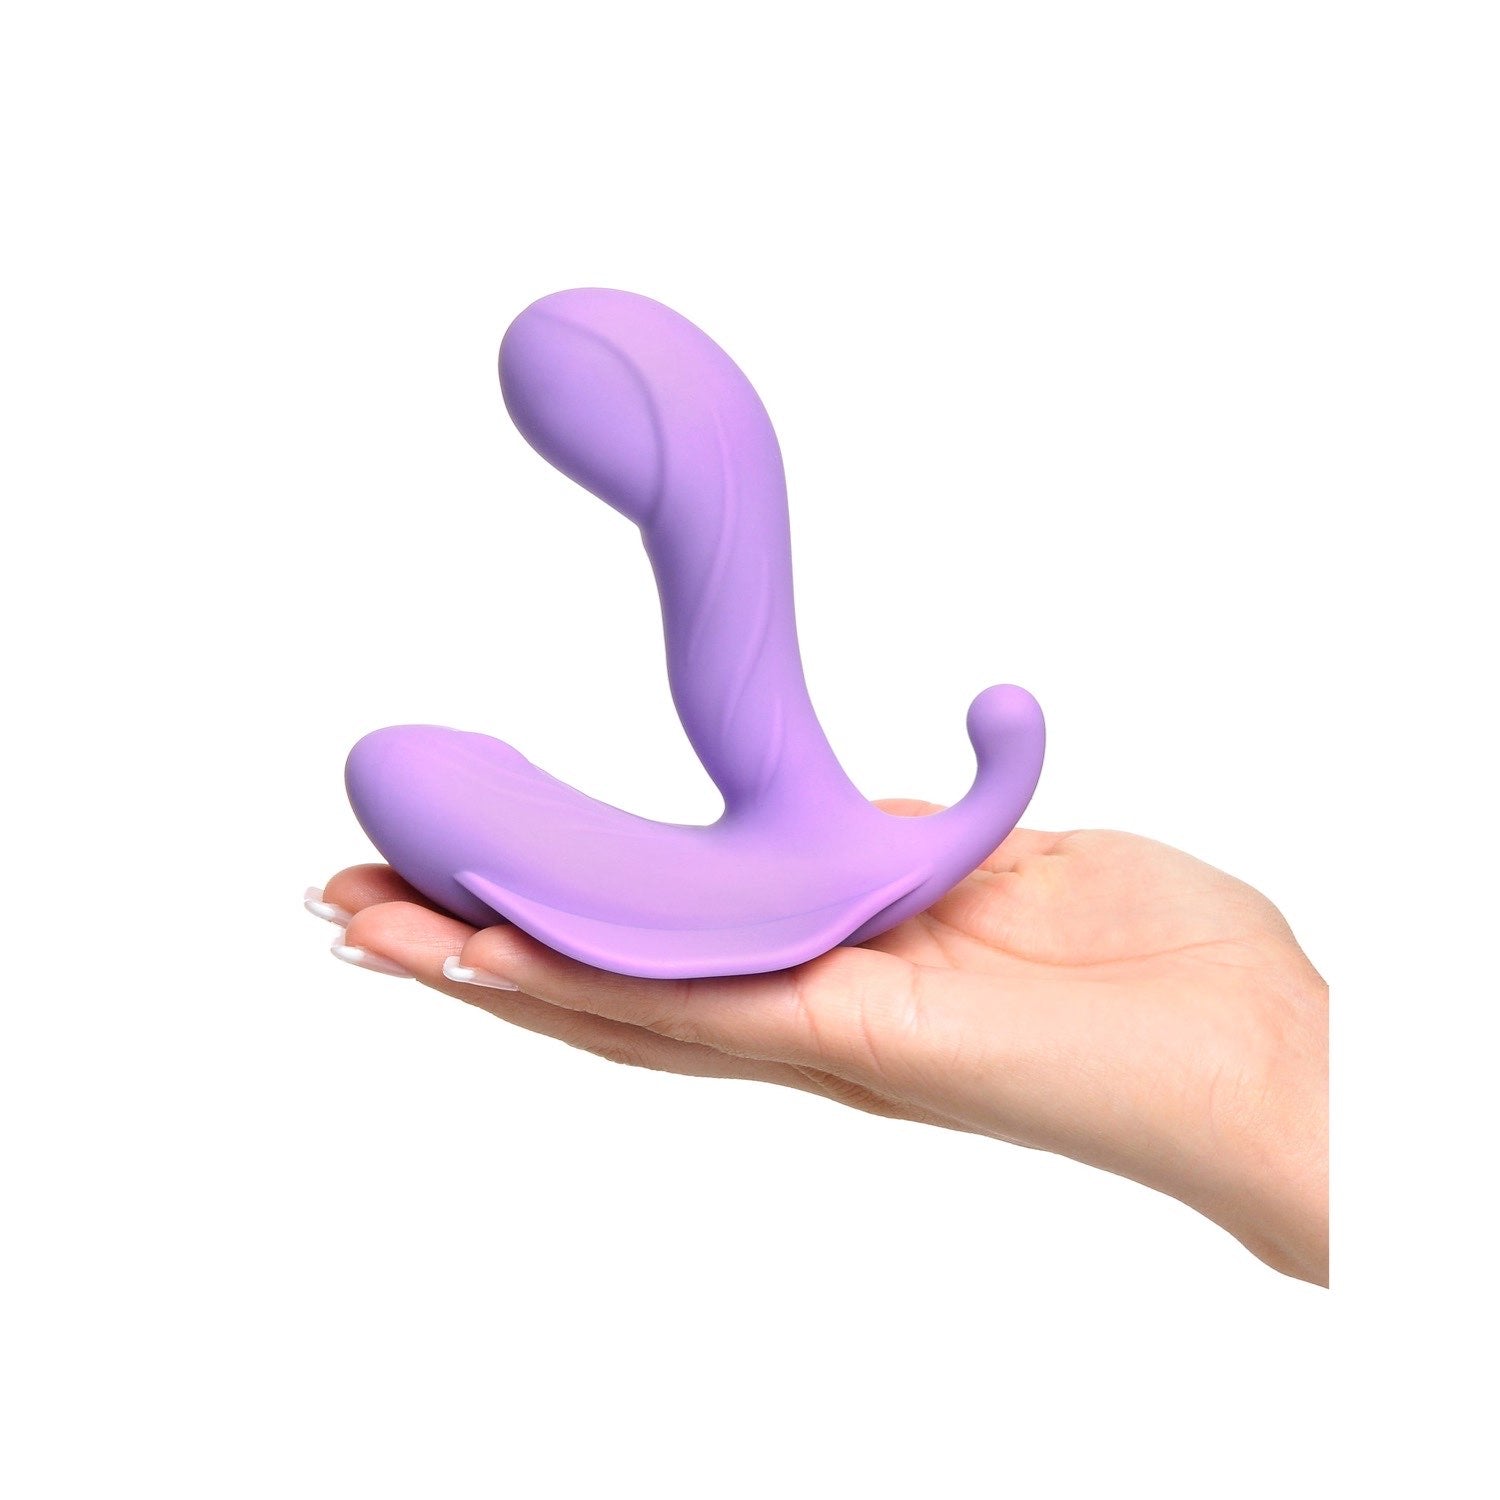 Fantasy For Her G-Spot Stimulate-Her - Purple USB Rechargeable Vibrator with Clit Stimulator and Wireless Remote by Pipedream